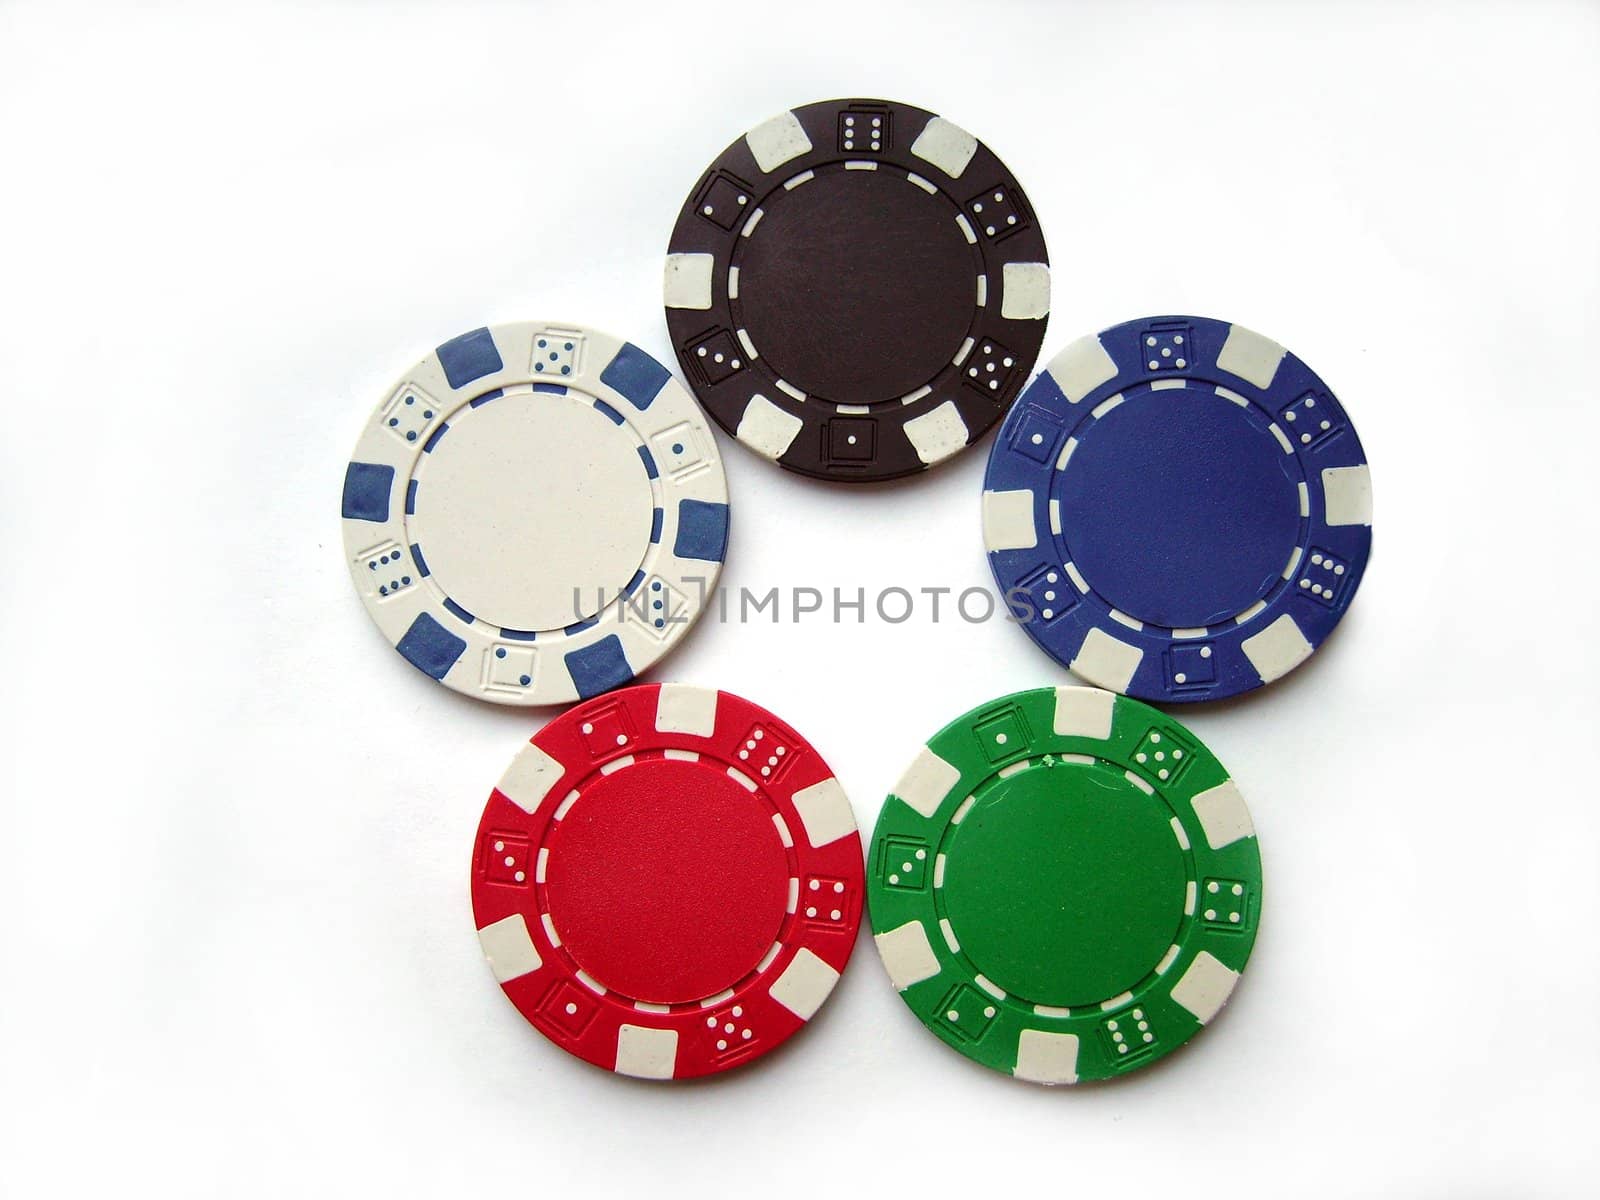 A collection of different colored poker chips